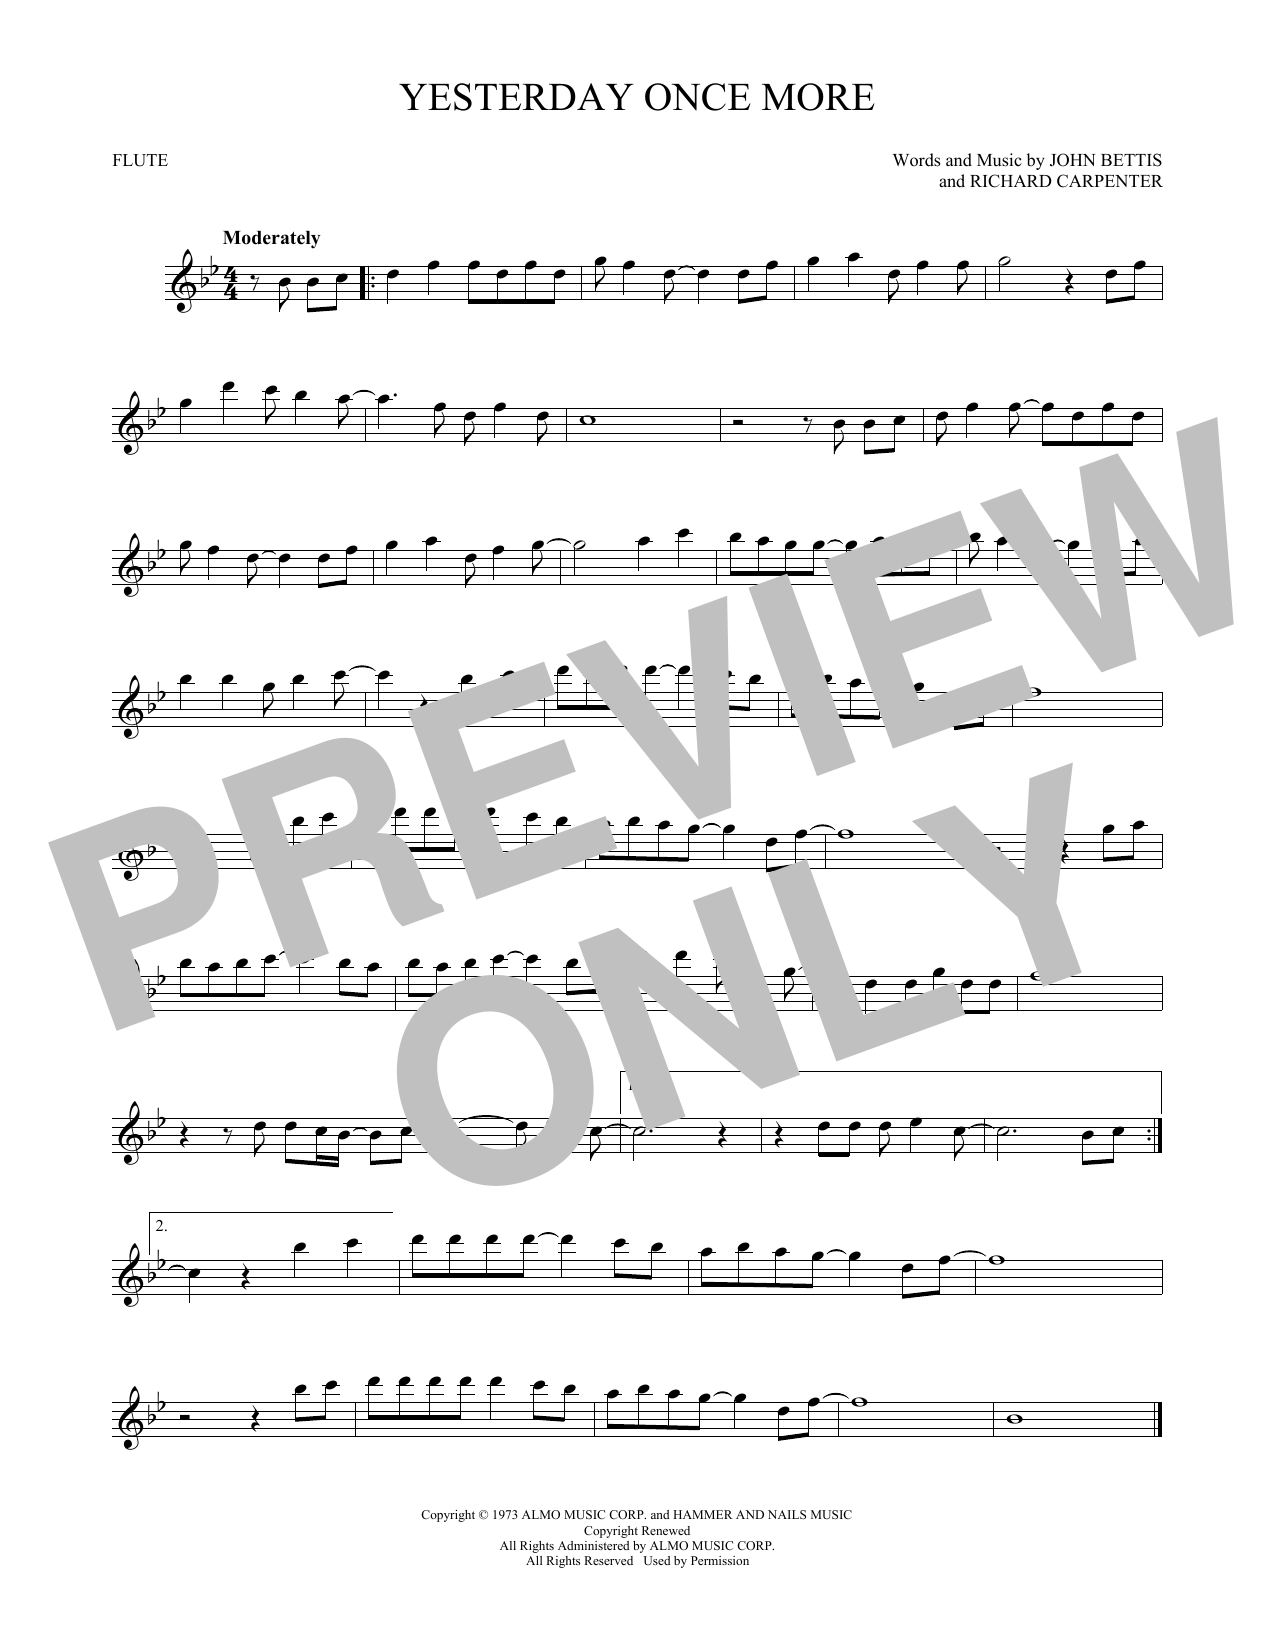 Carpenters Yesterday Once More sheet music notes and chords. Download Printable PDF.